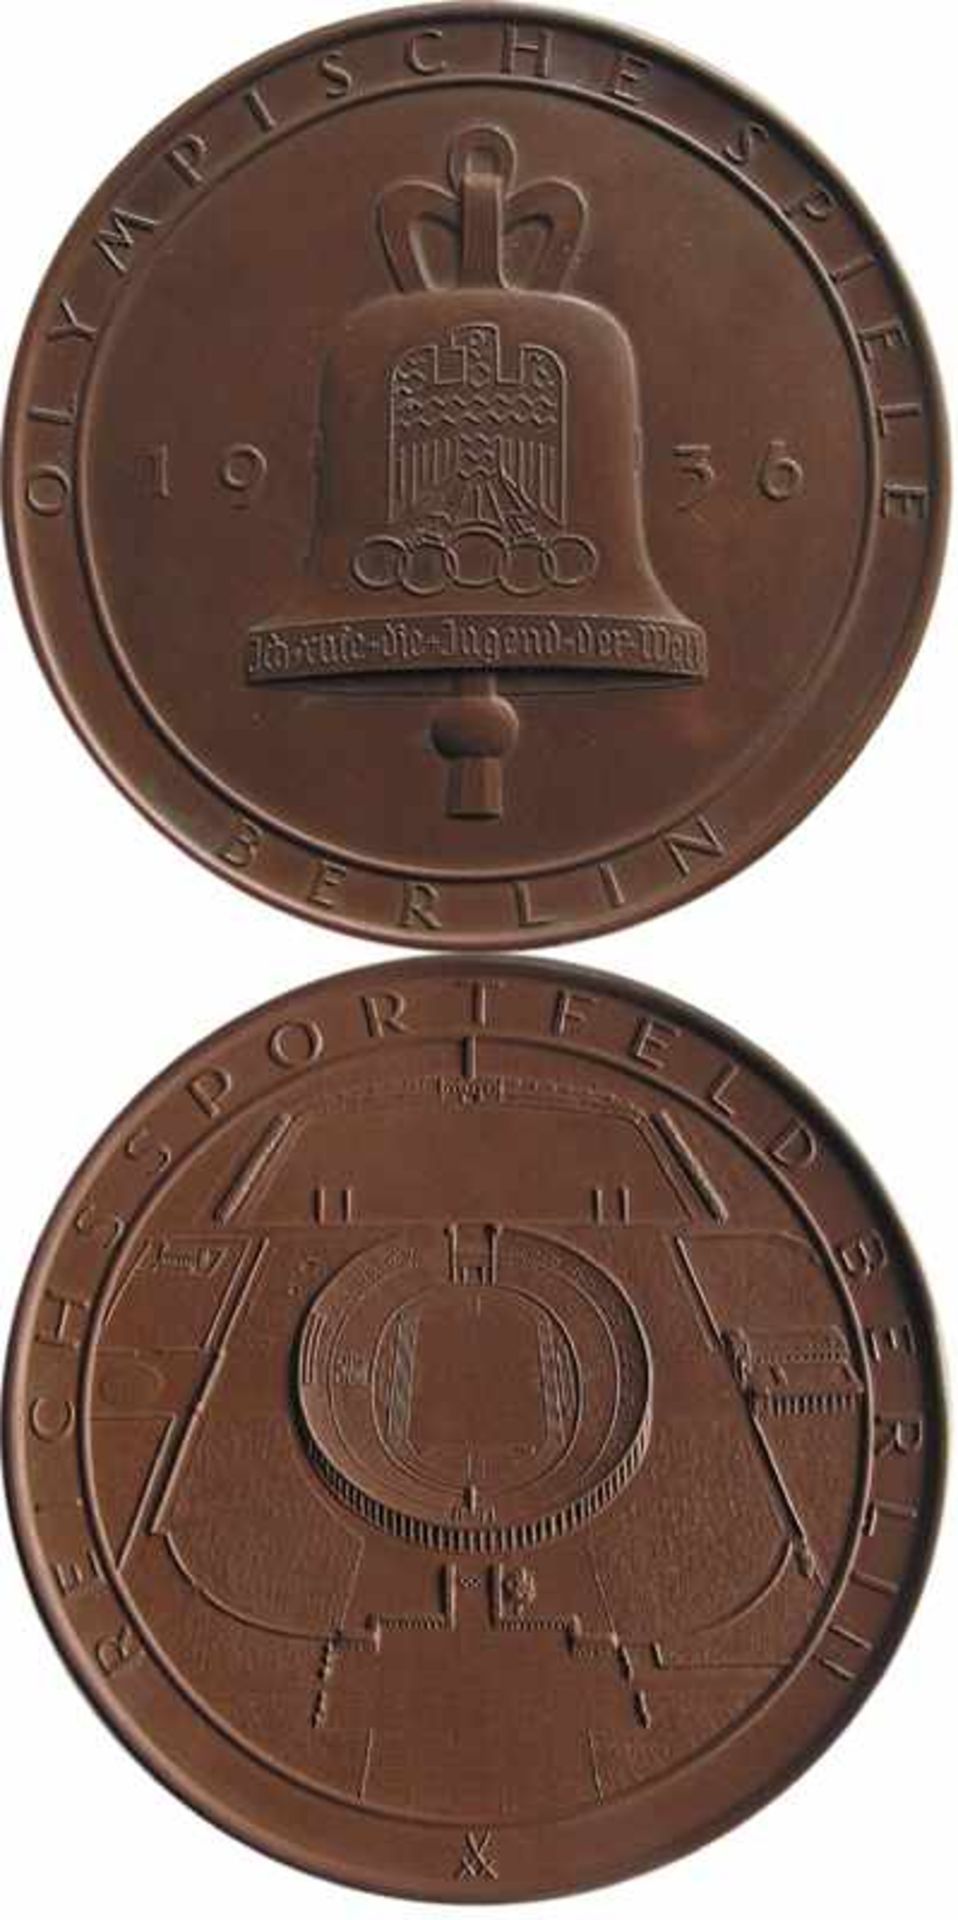 Olympic Games 1936 Porcelain medal from Meissen - commemorating the Olympics in Berlin. Olympic Bell